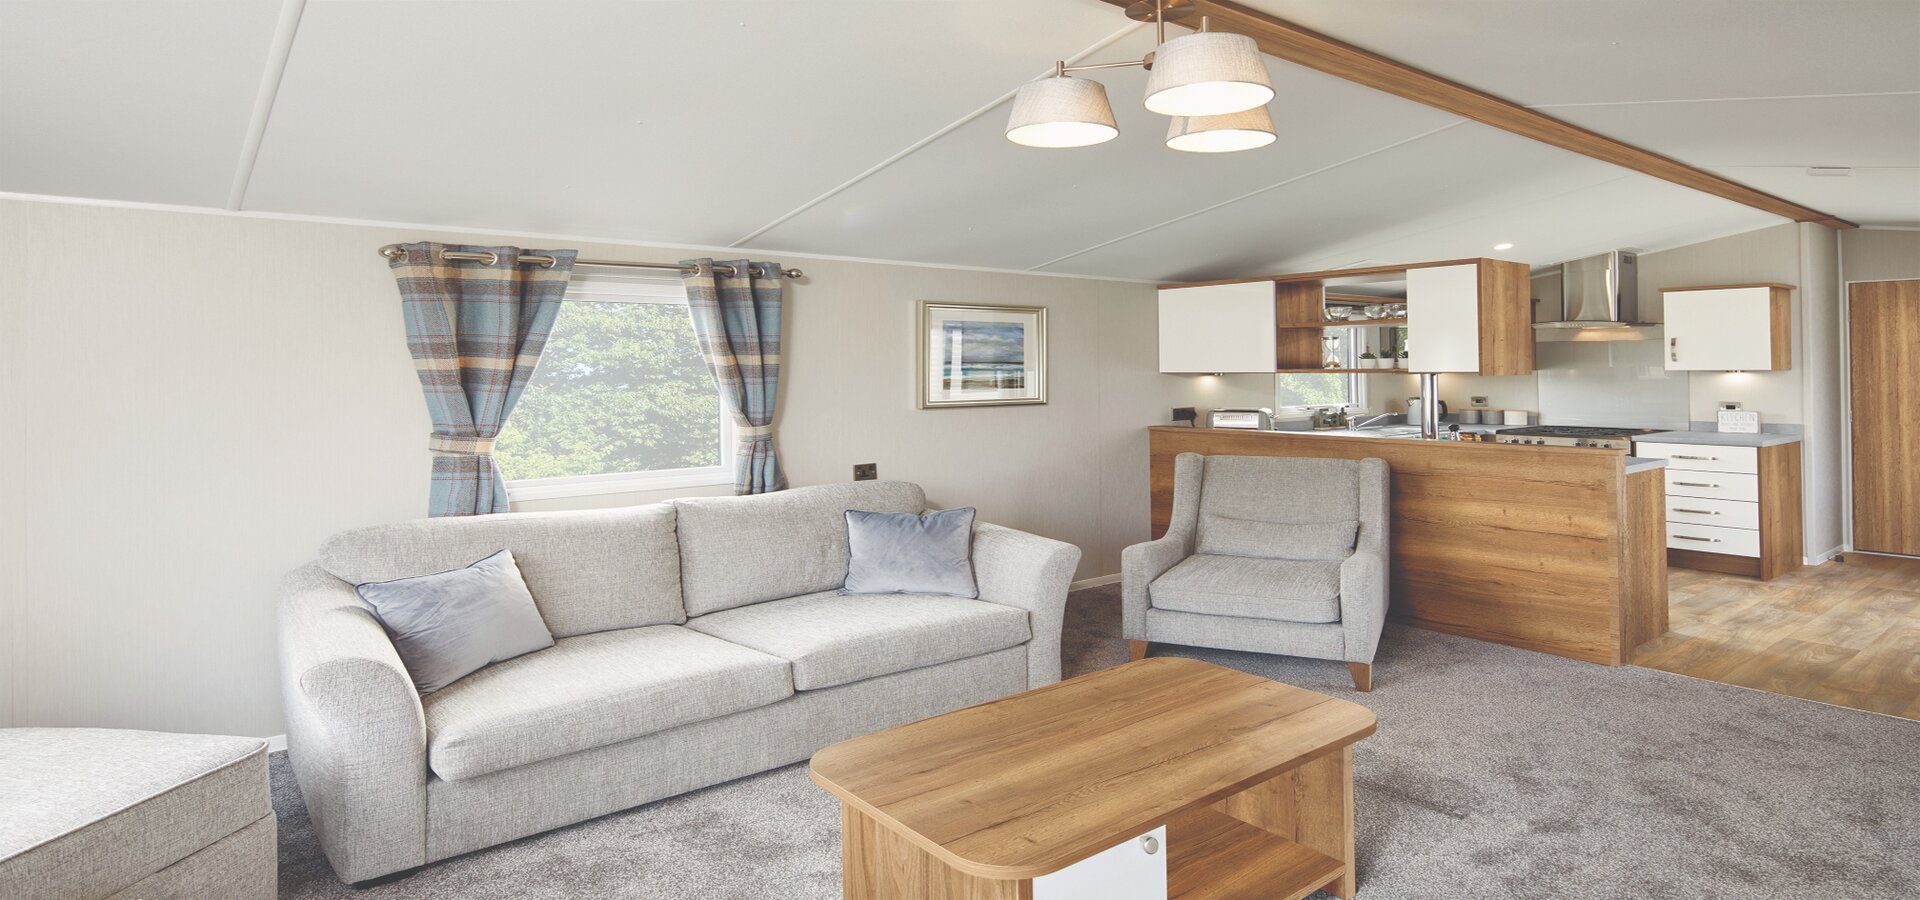 Willerby Holiday Homes Living Area